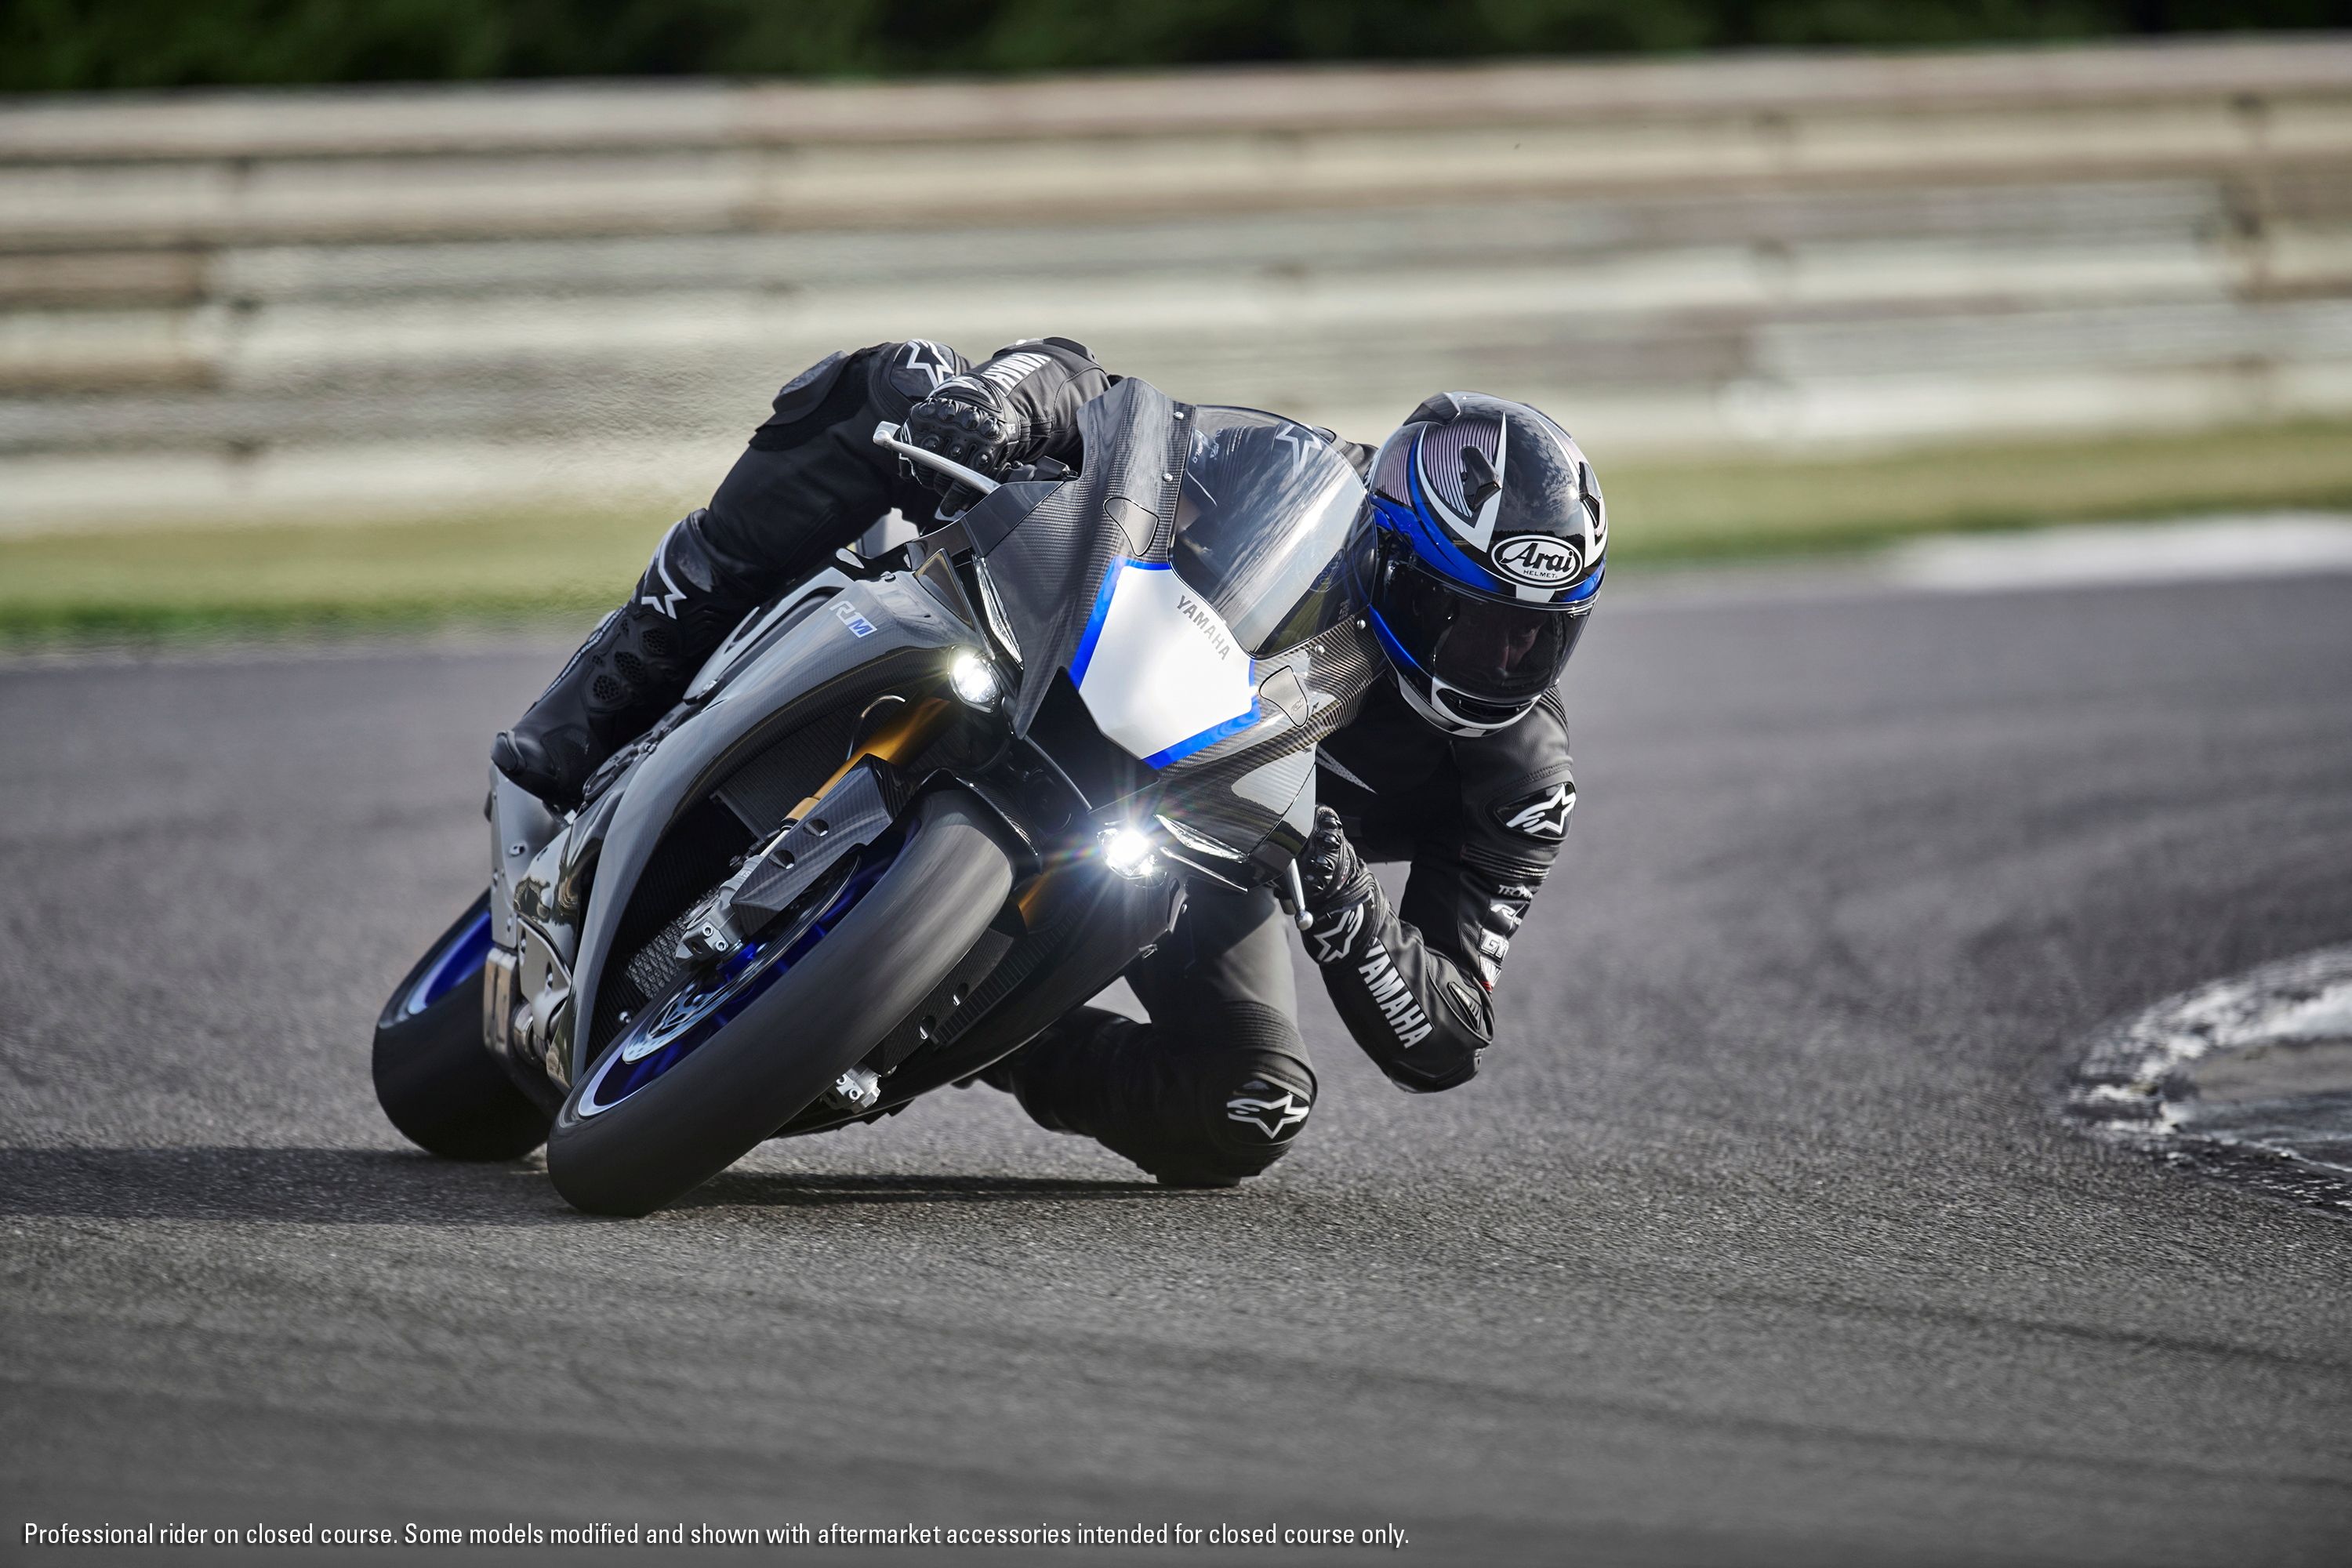 Yamaha YZF R1 / R1M Picture, Photo, Wallpaper